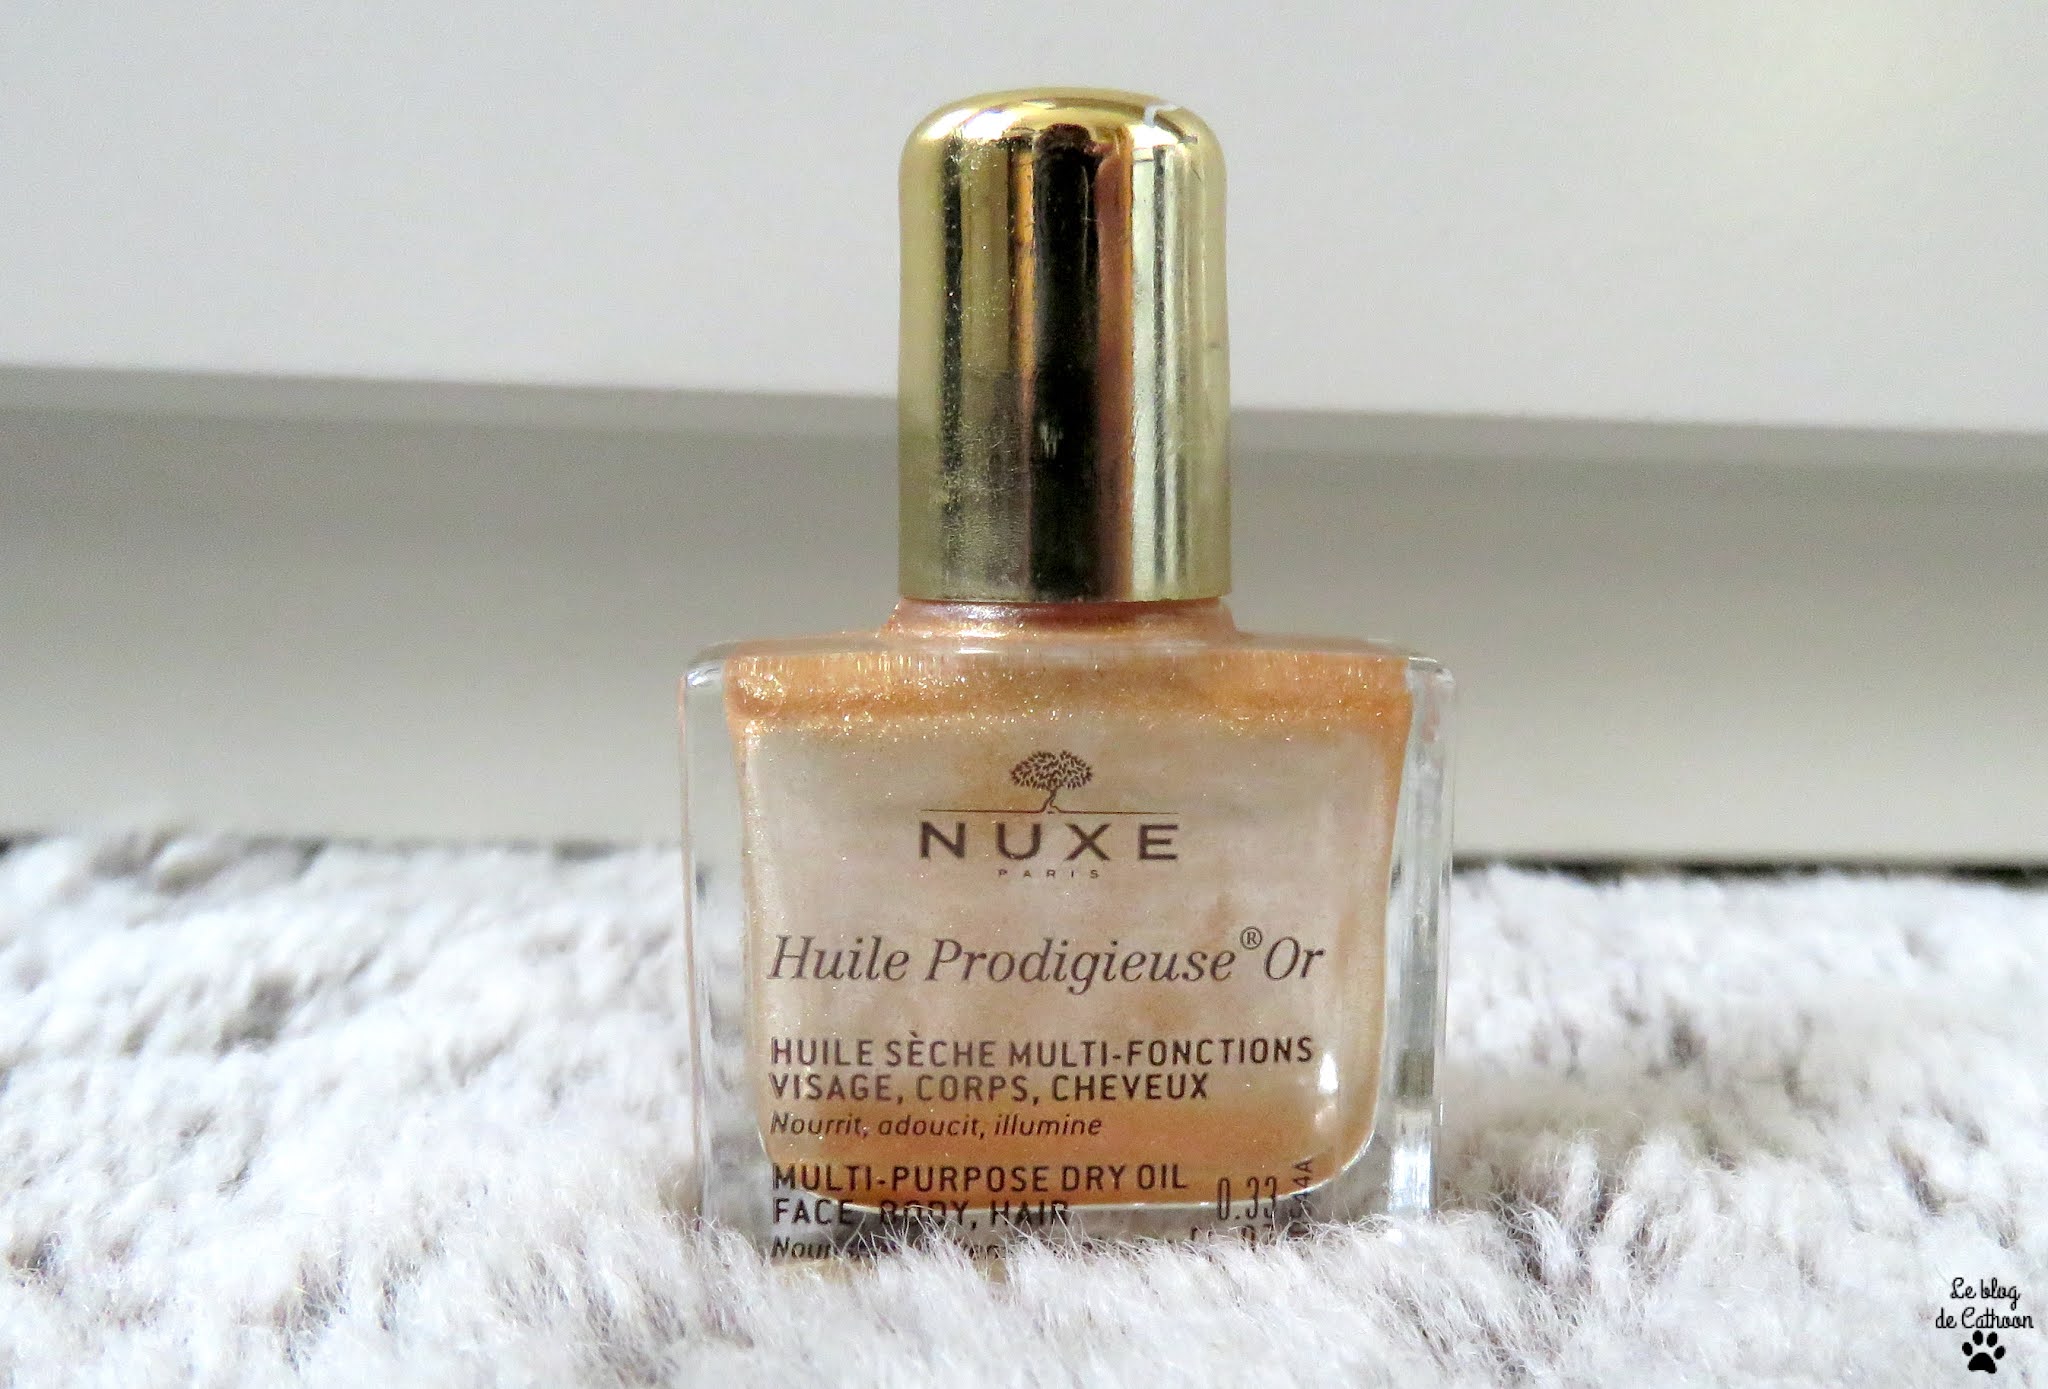 Huile Prodigieuse Or - Huile Sèche Multi-fonctions - Nuxe